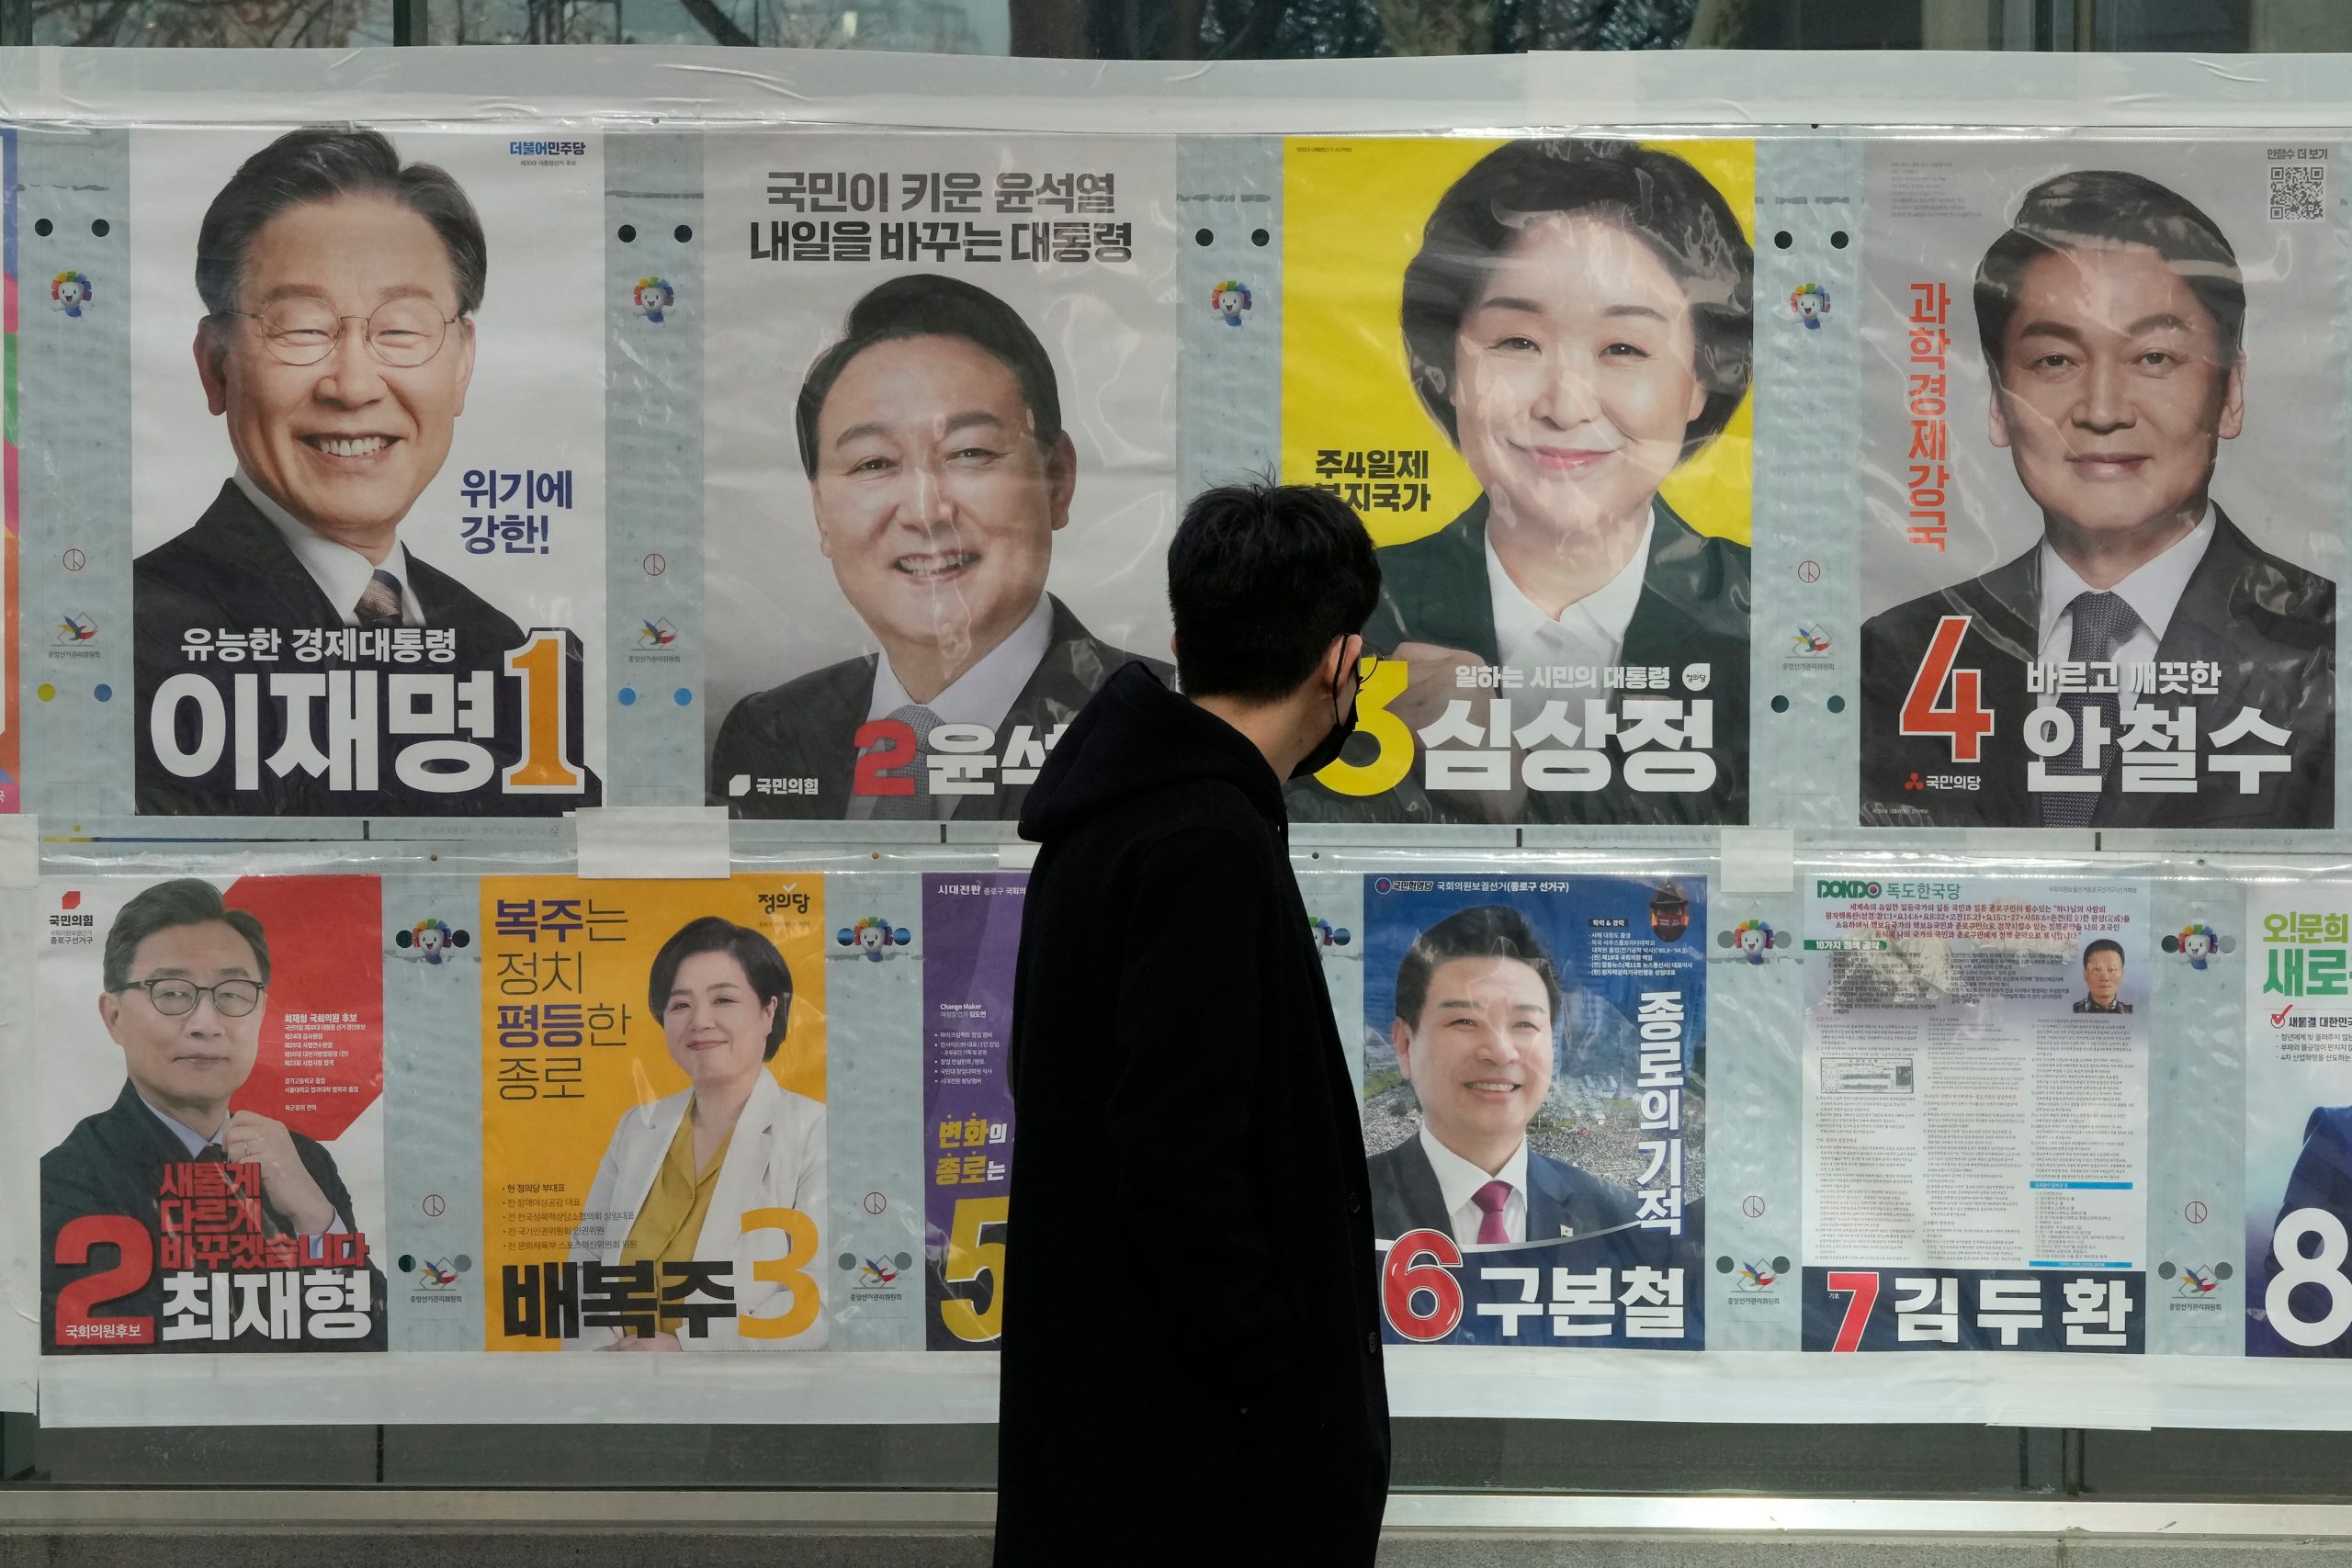 South Korea’s presidential election: All you need to know